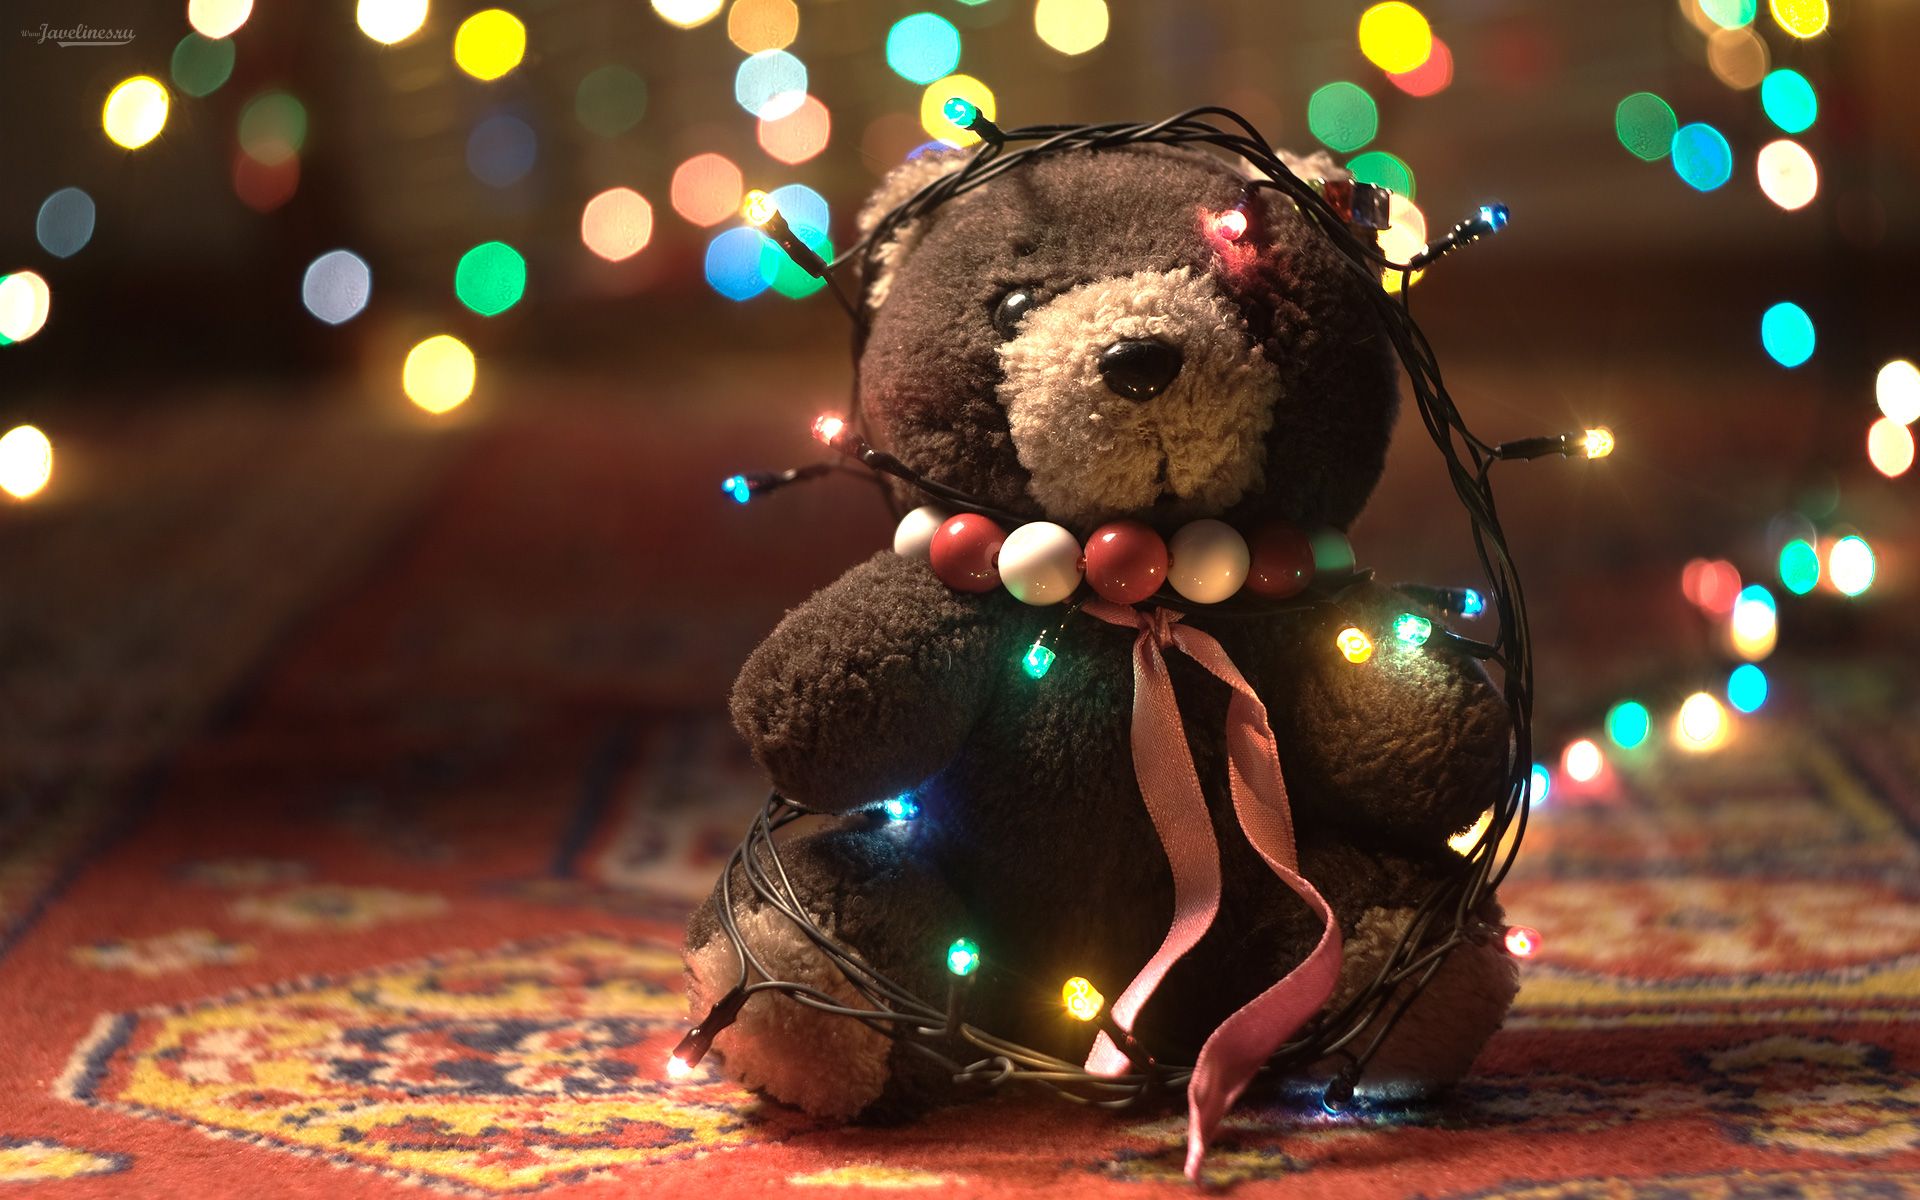 Adorable Teddy Bear Wallpapers | HD Wallpapers